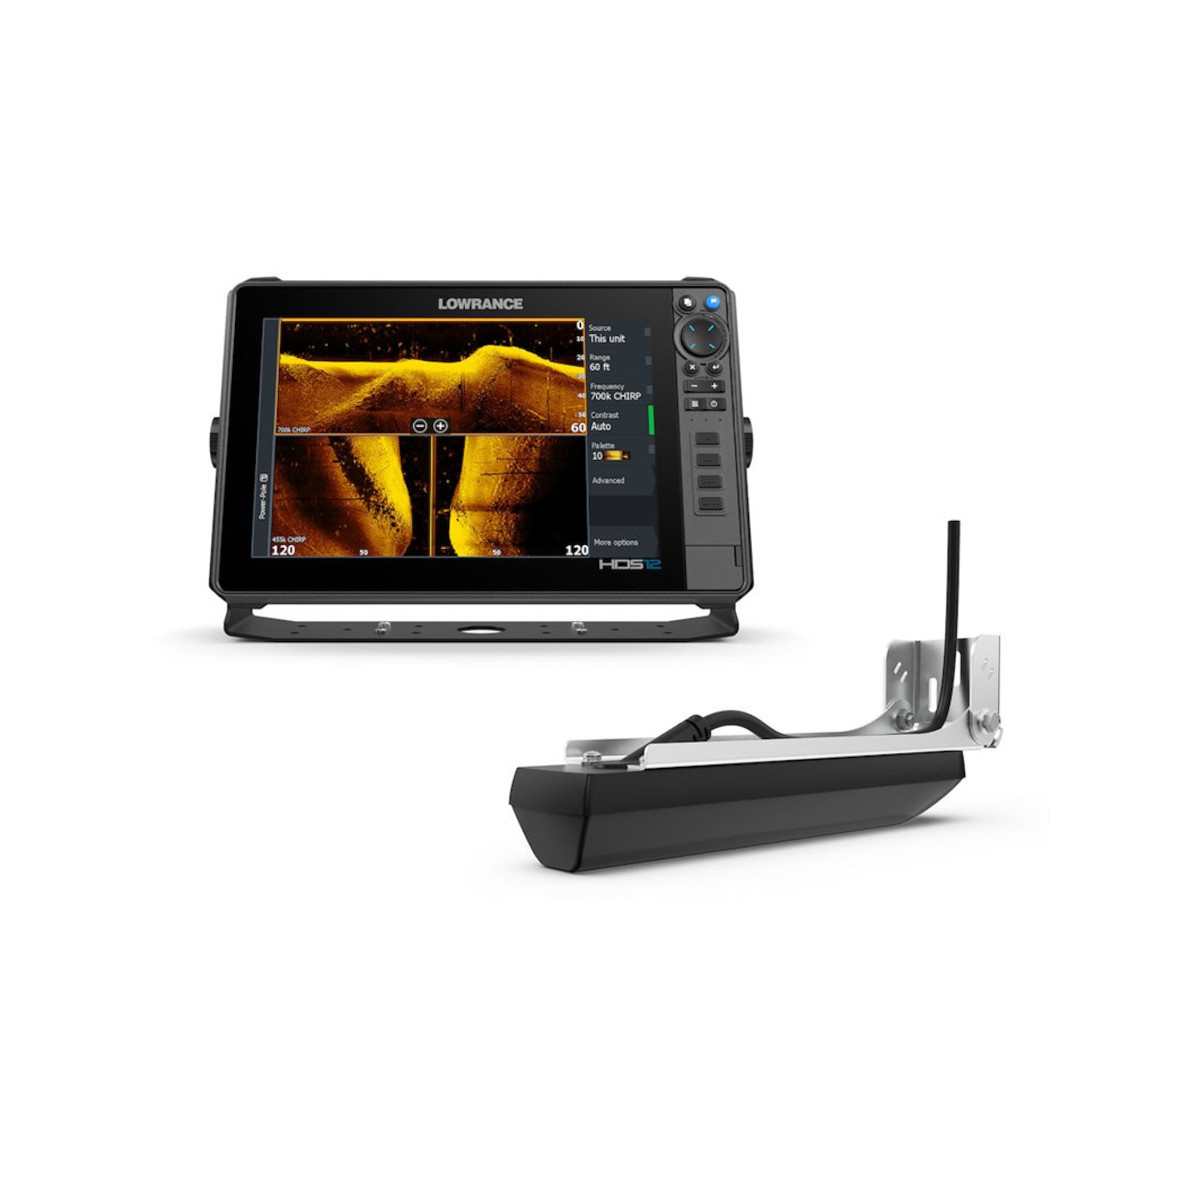 Lowrance HDS Pro 12 kaartplotter met touch-display incl. Active Imaging HD transducer